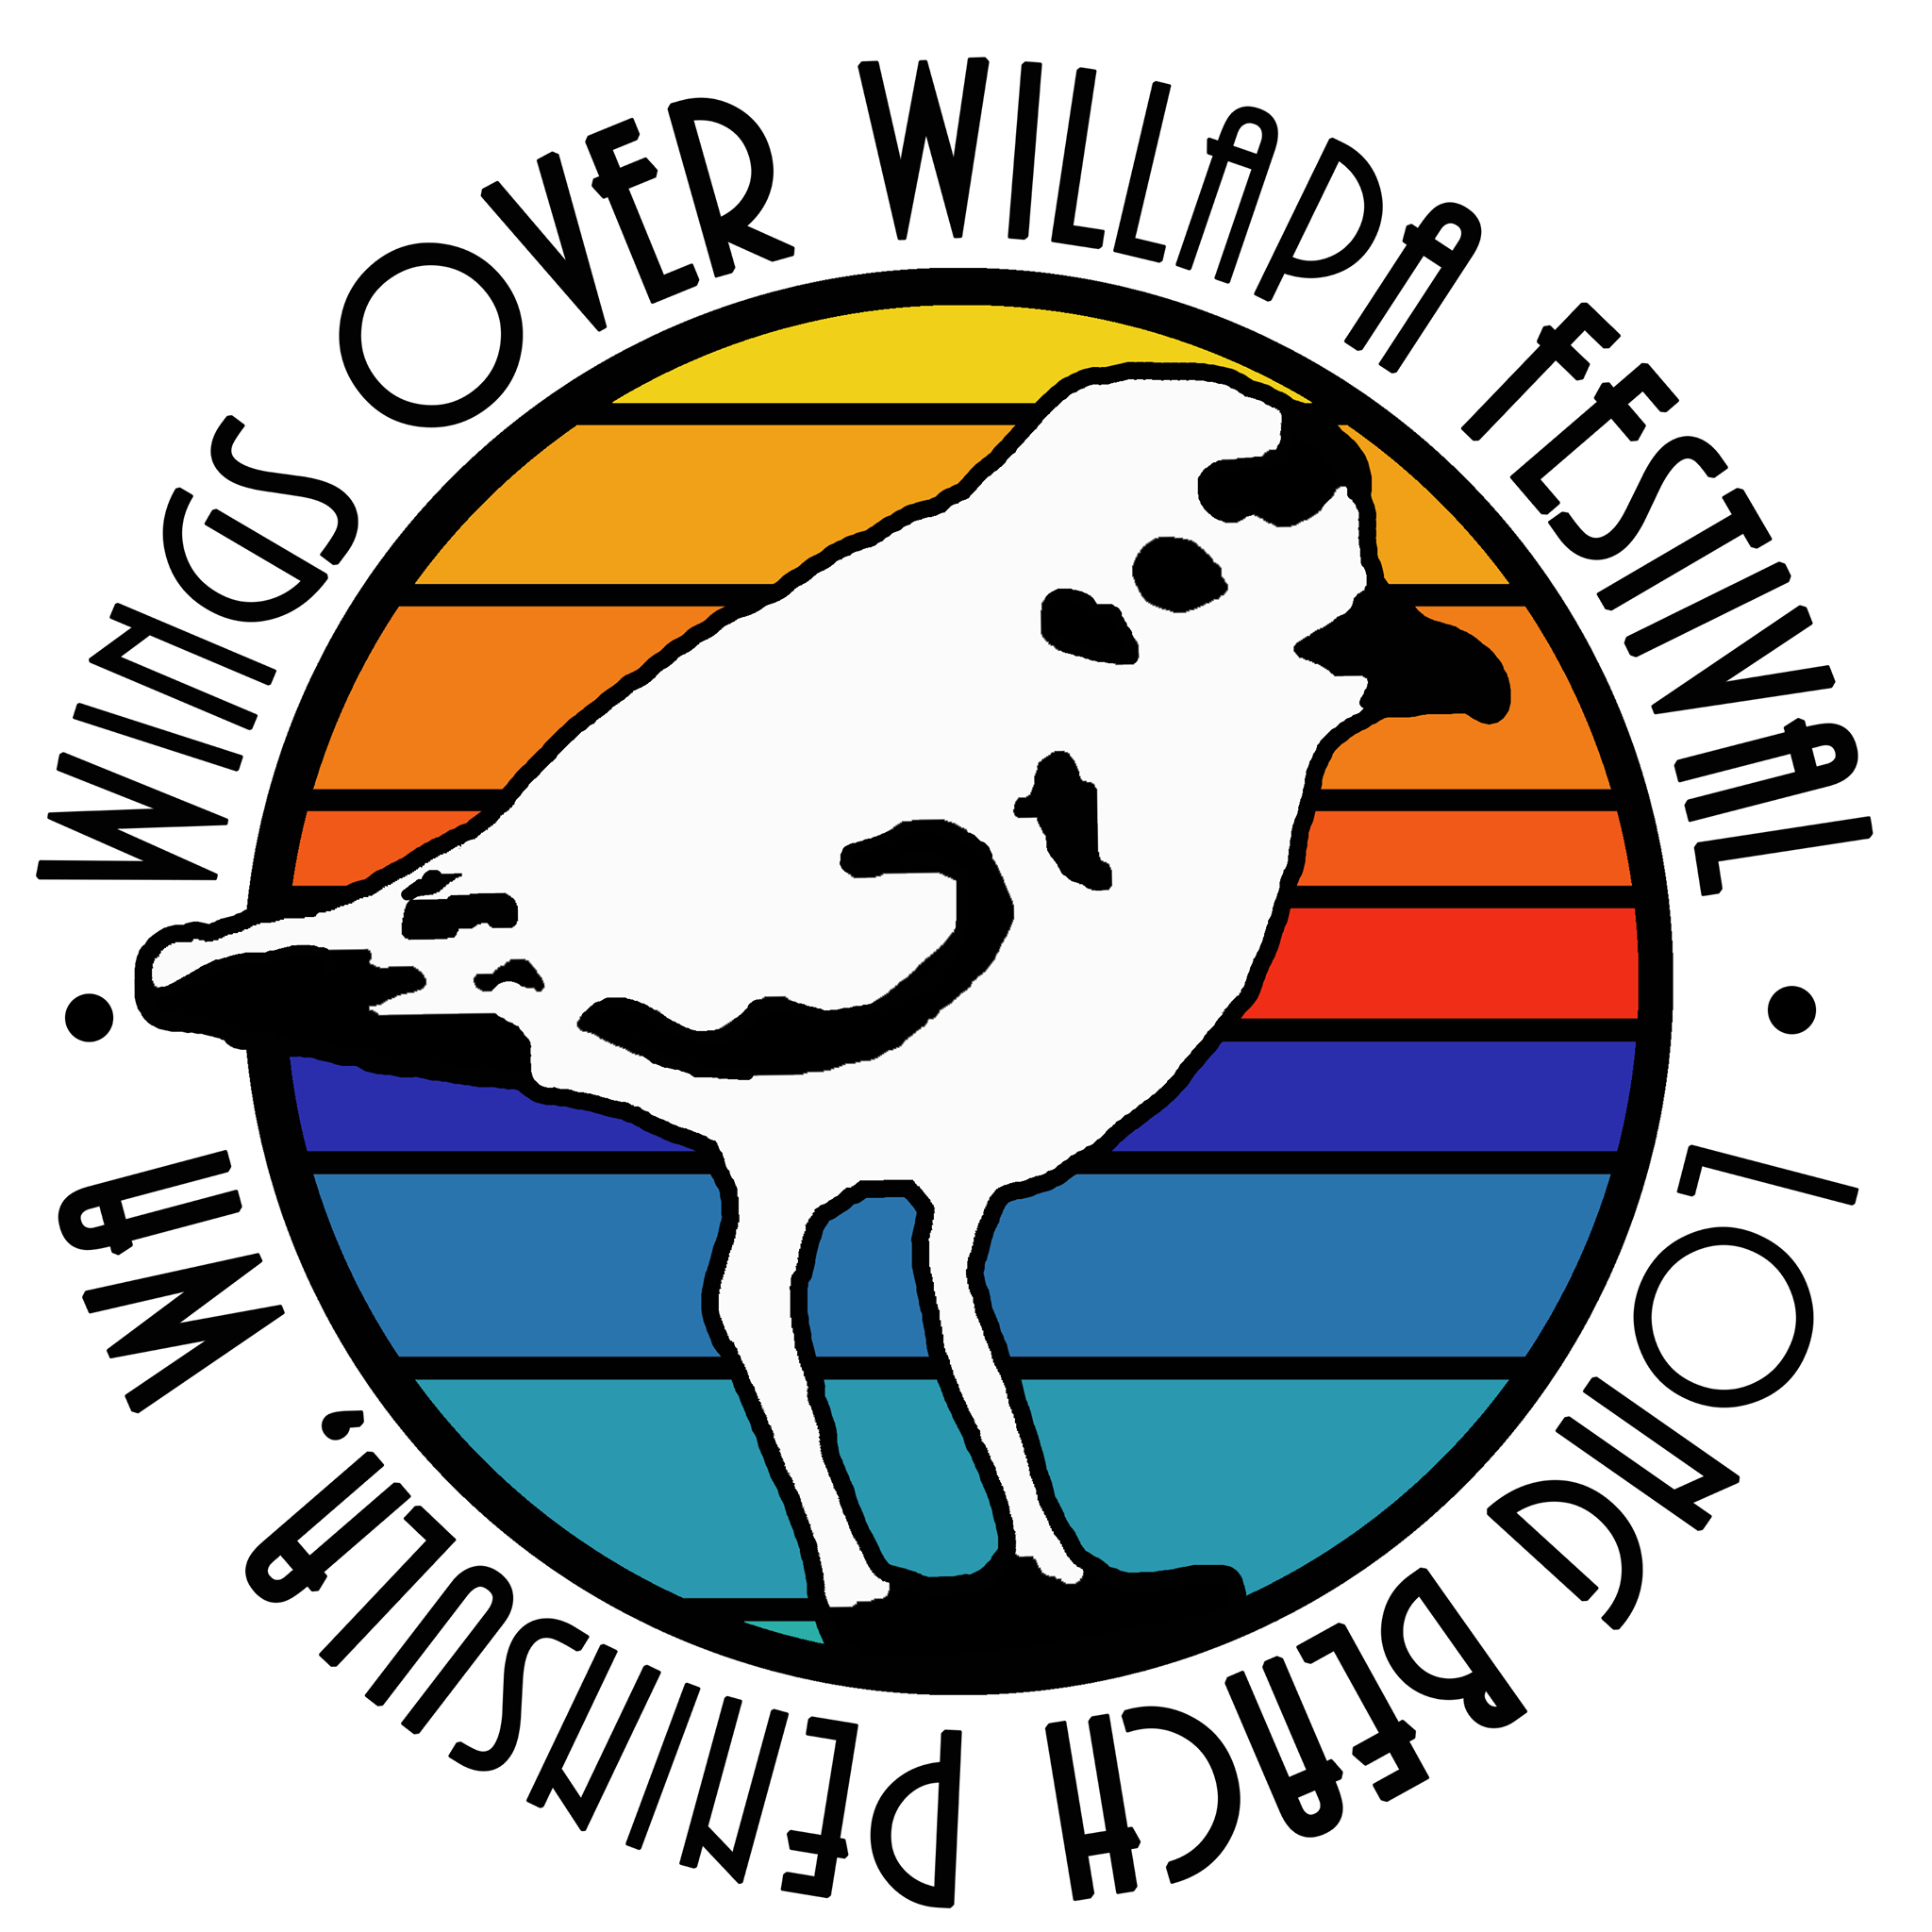 Wings Over Willapa Logo showing a small shorebird with rainbow colors behind it.